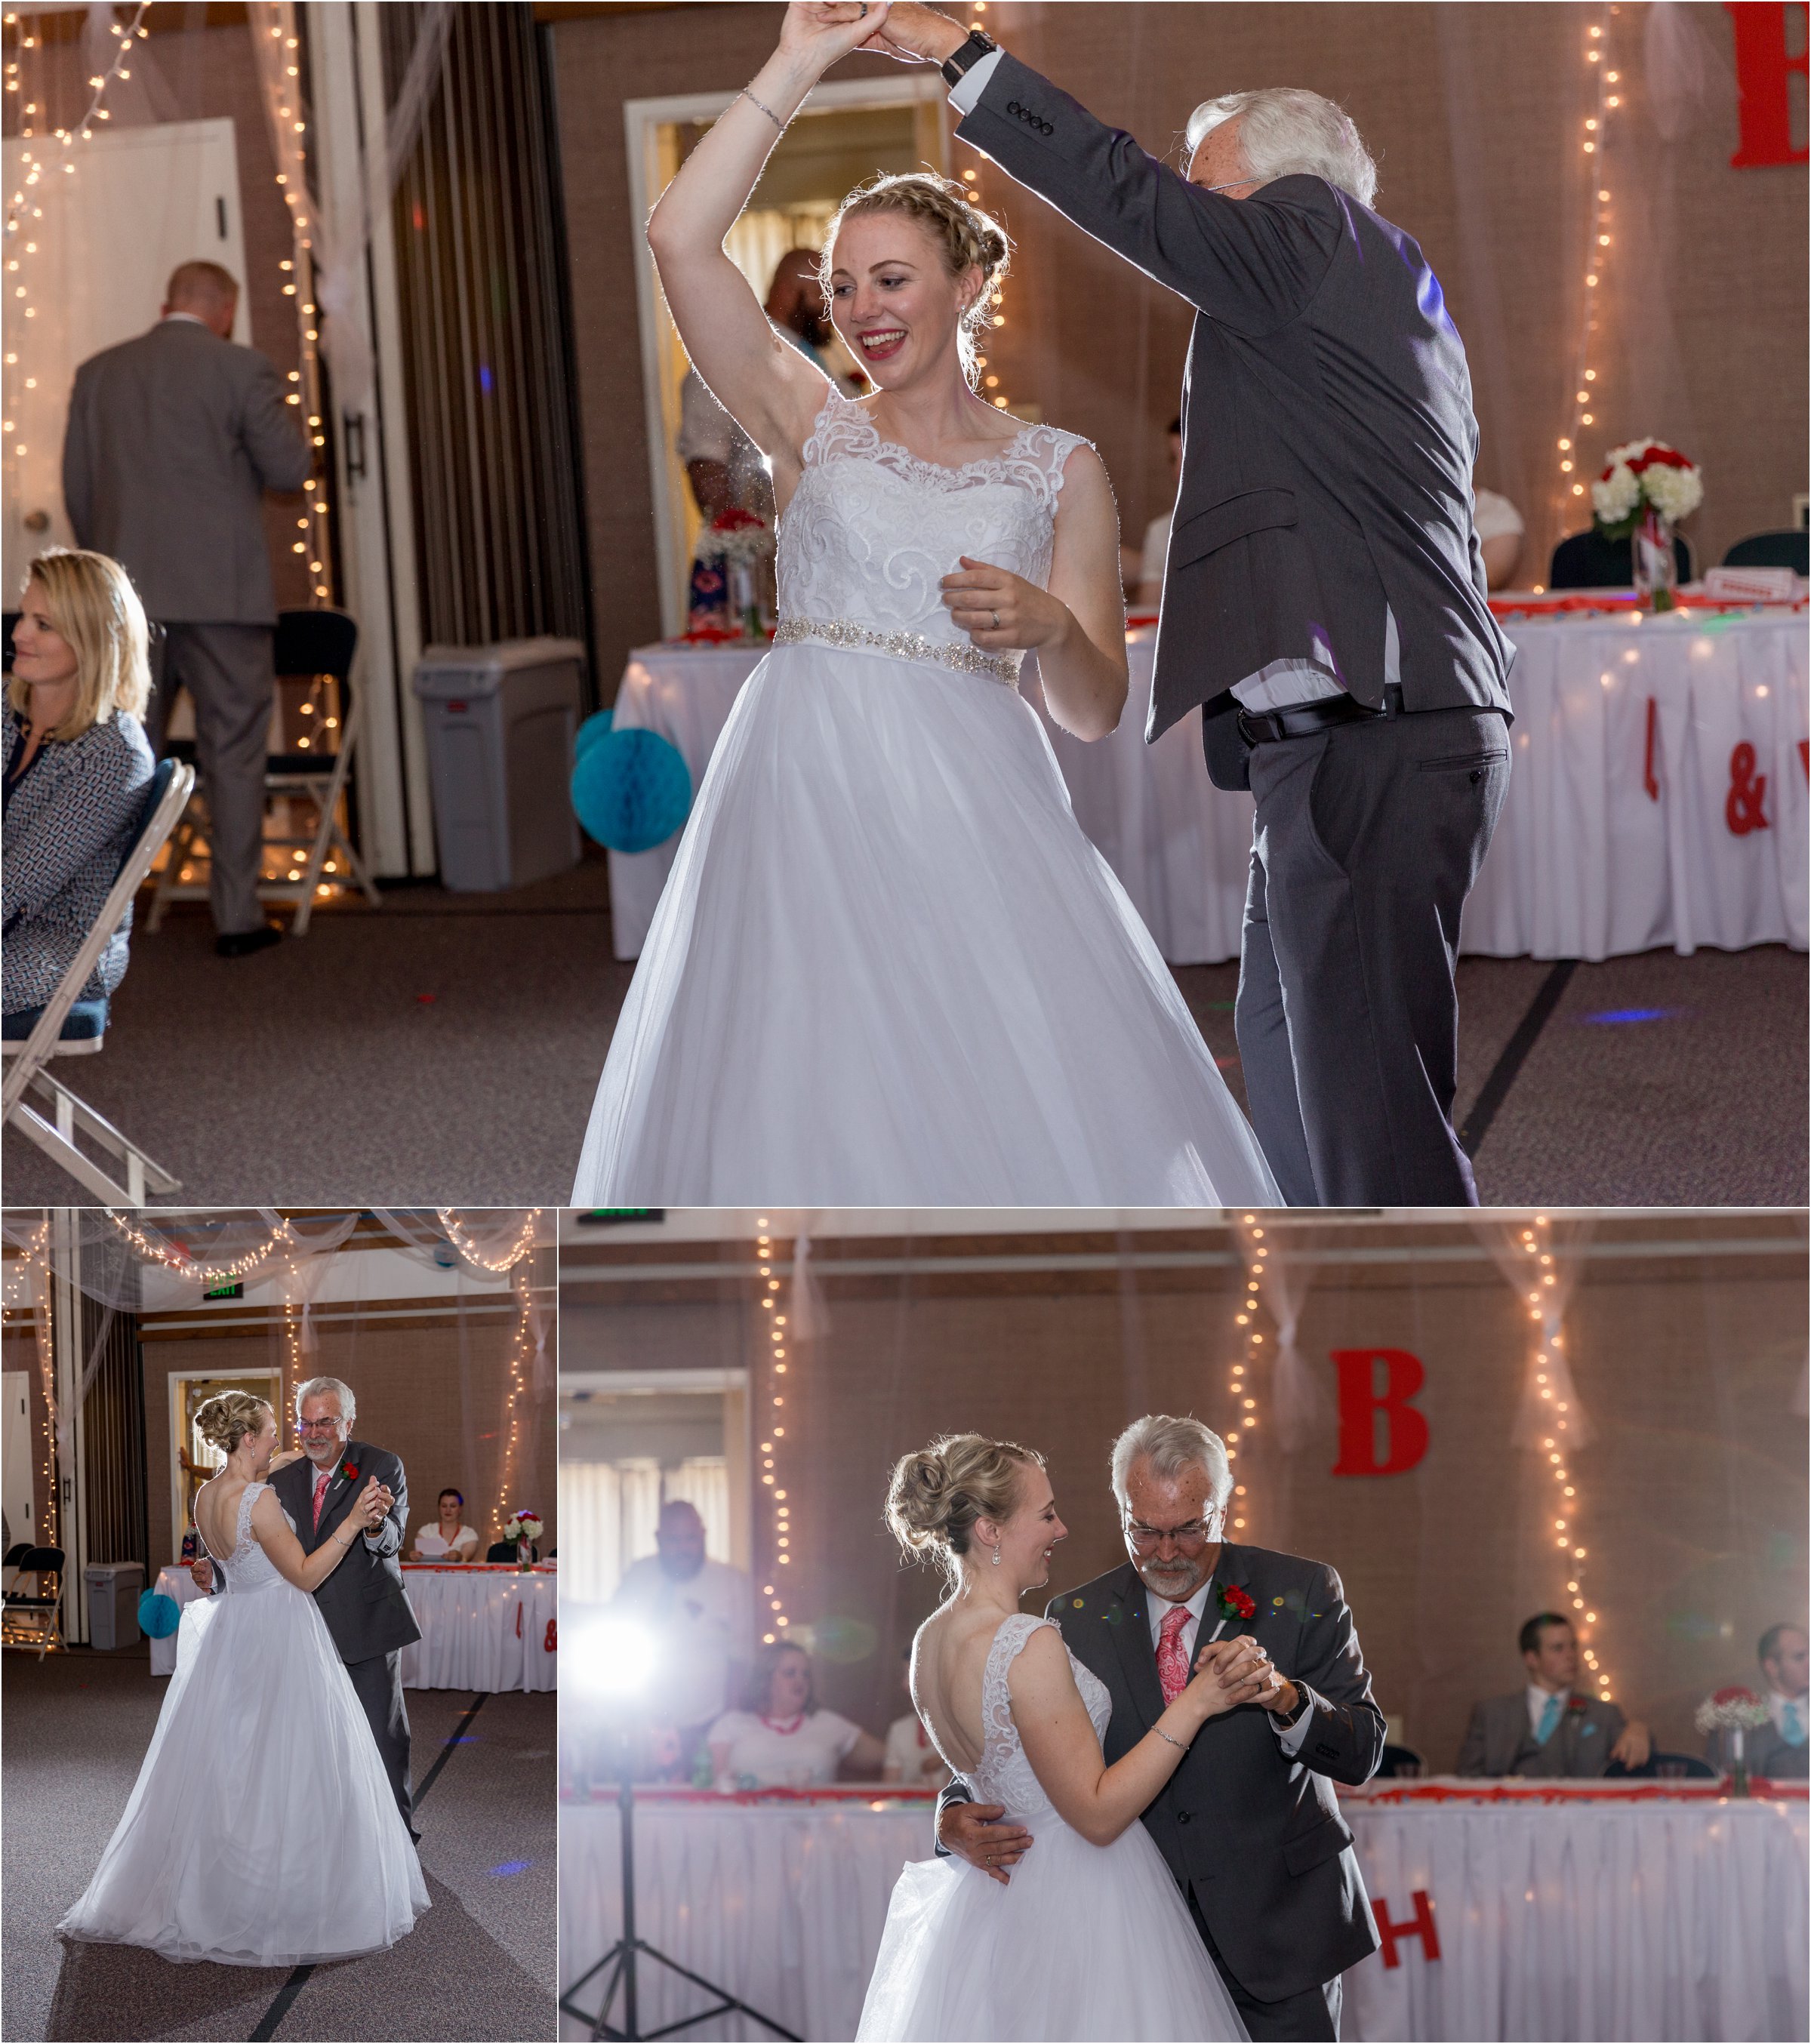 bride dances with her father at her wedding reception